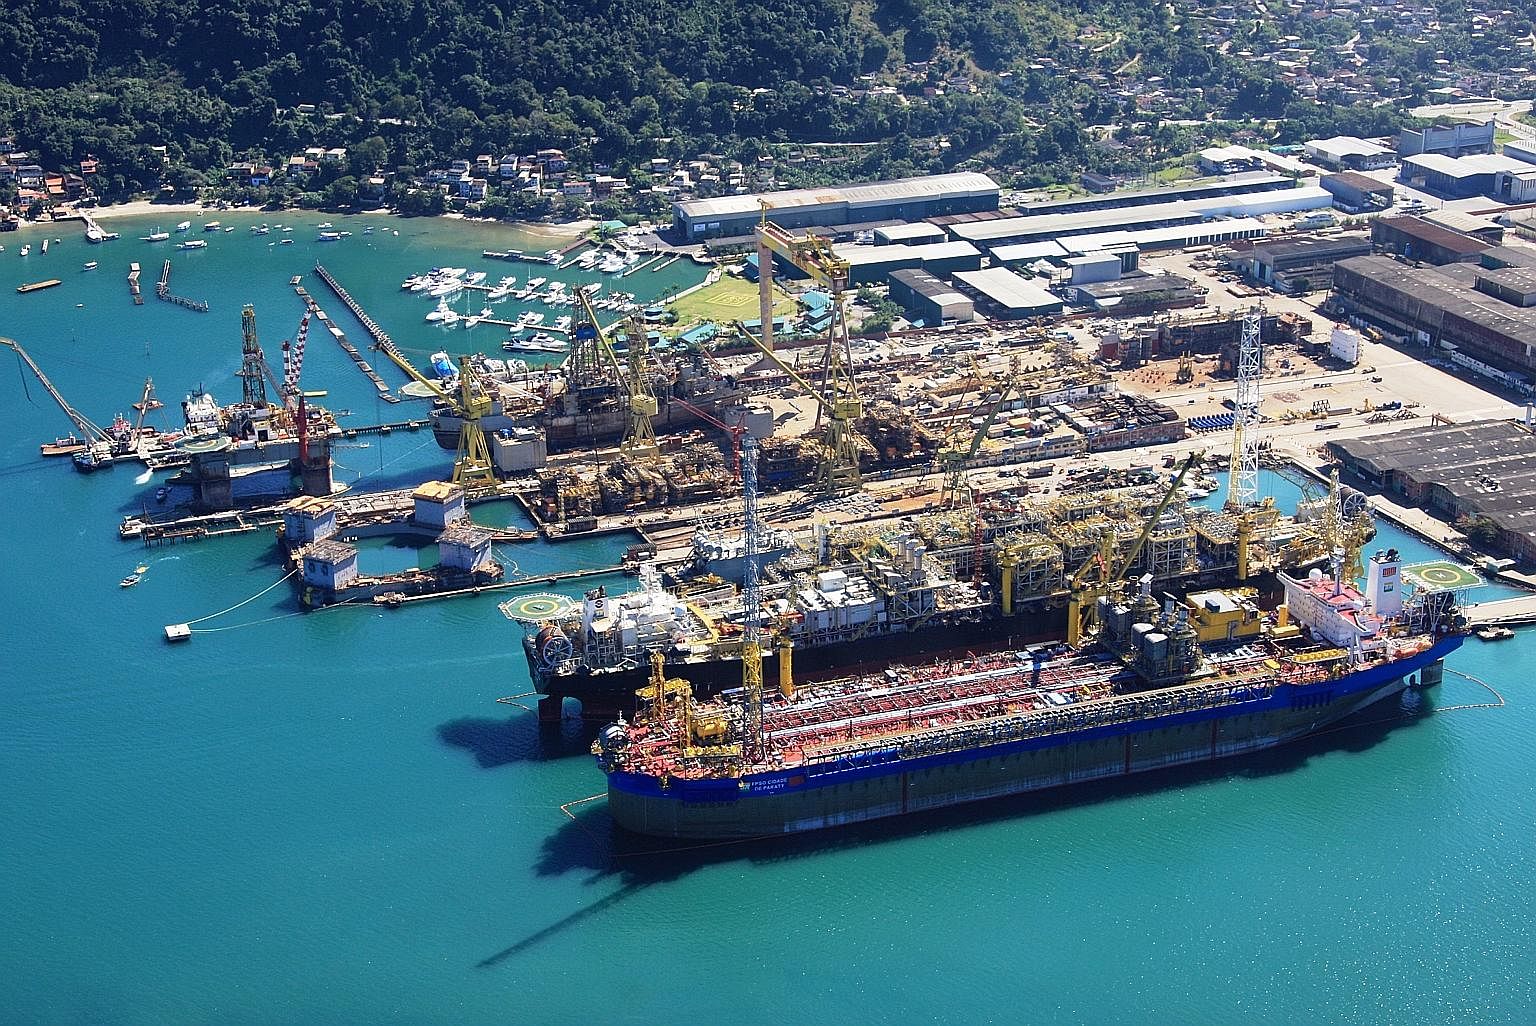 Keppel's shipyard in Brazil. Keppel O&M has said it will continue its operations in Brazil, despite having to pay US$422 million (S$567million) in fines as part of a global resolution for a corruption probe across three jurisdictions in Singapore, Br